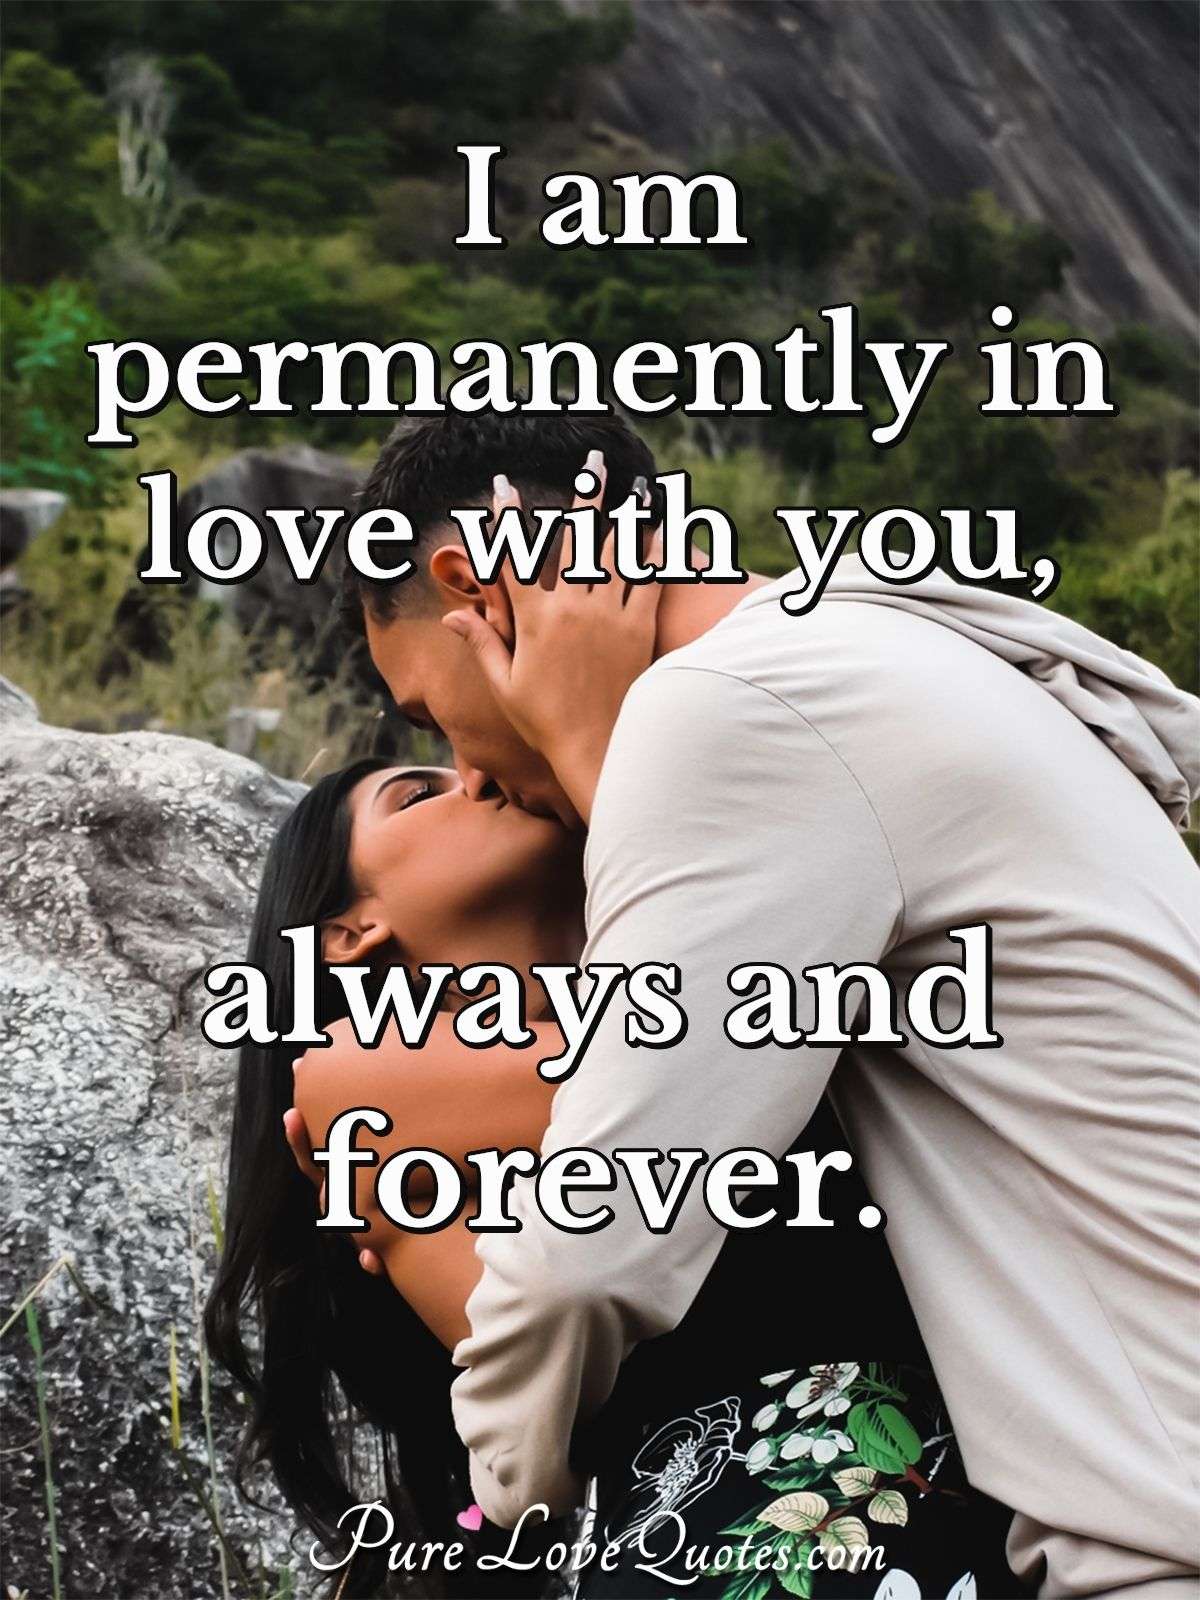 I am permanently in love with you, always and forever. PureLoveQuotes